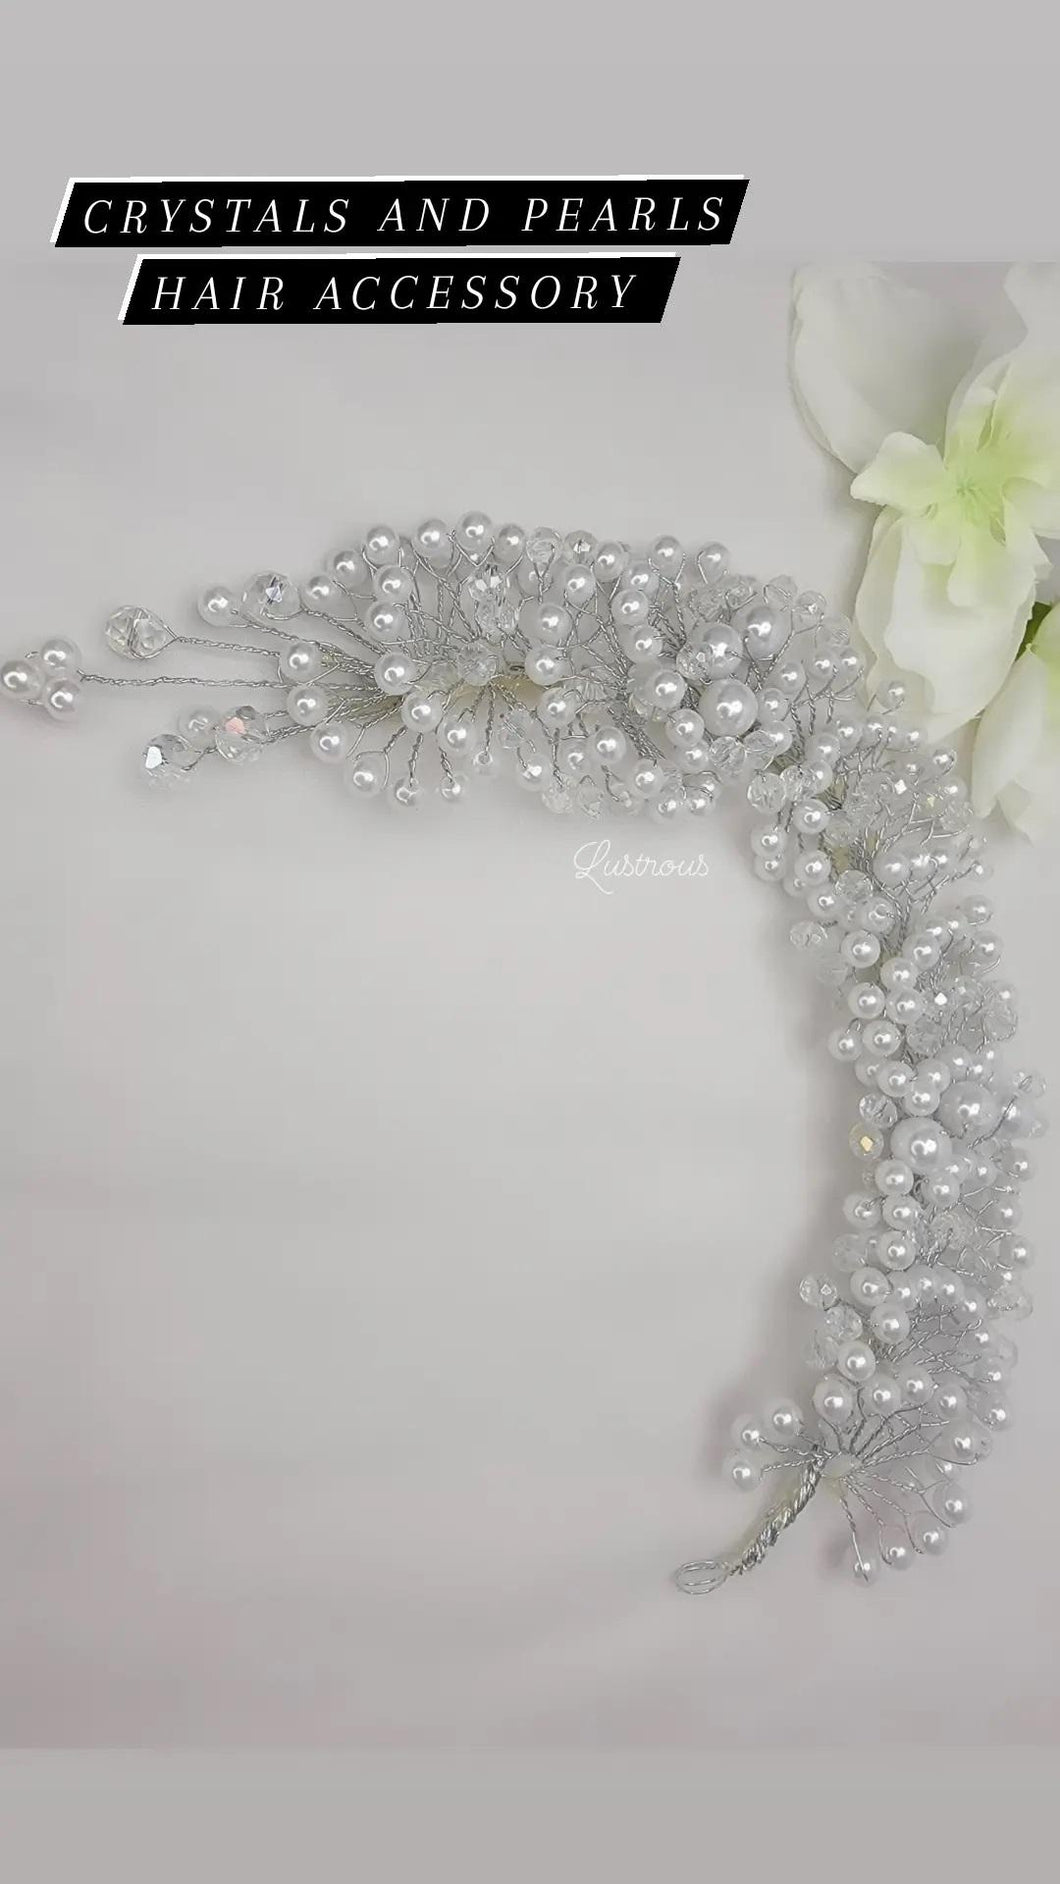 Pearls and crystals hair accessory